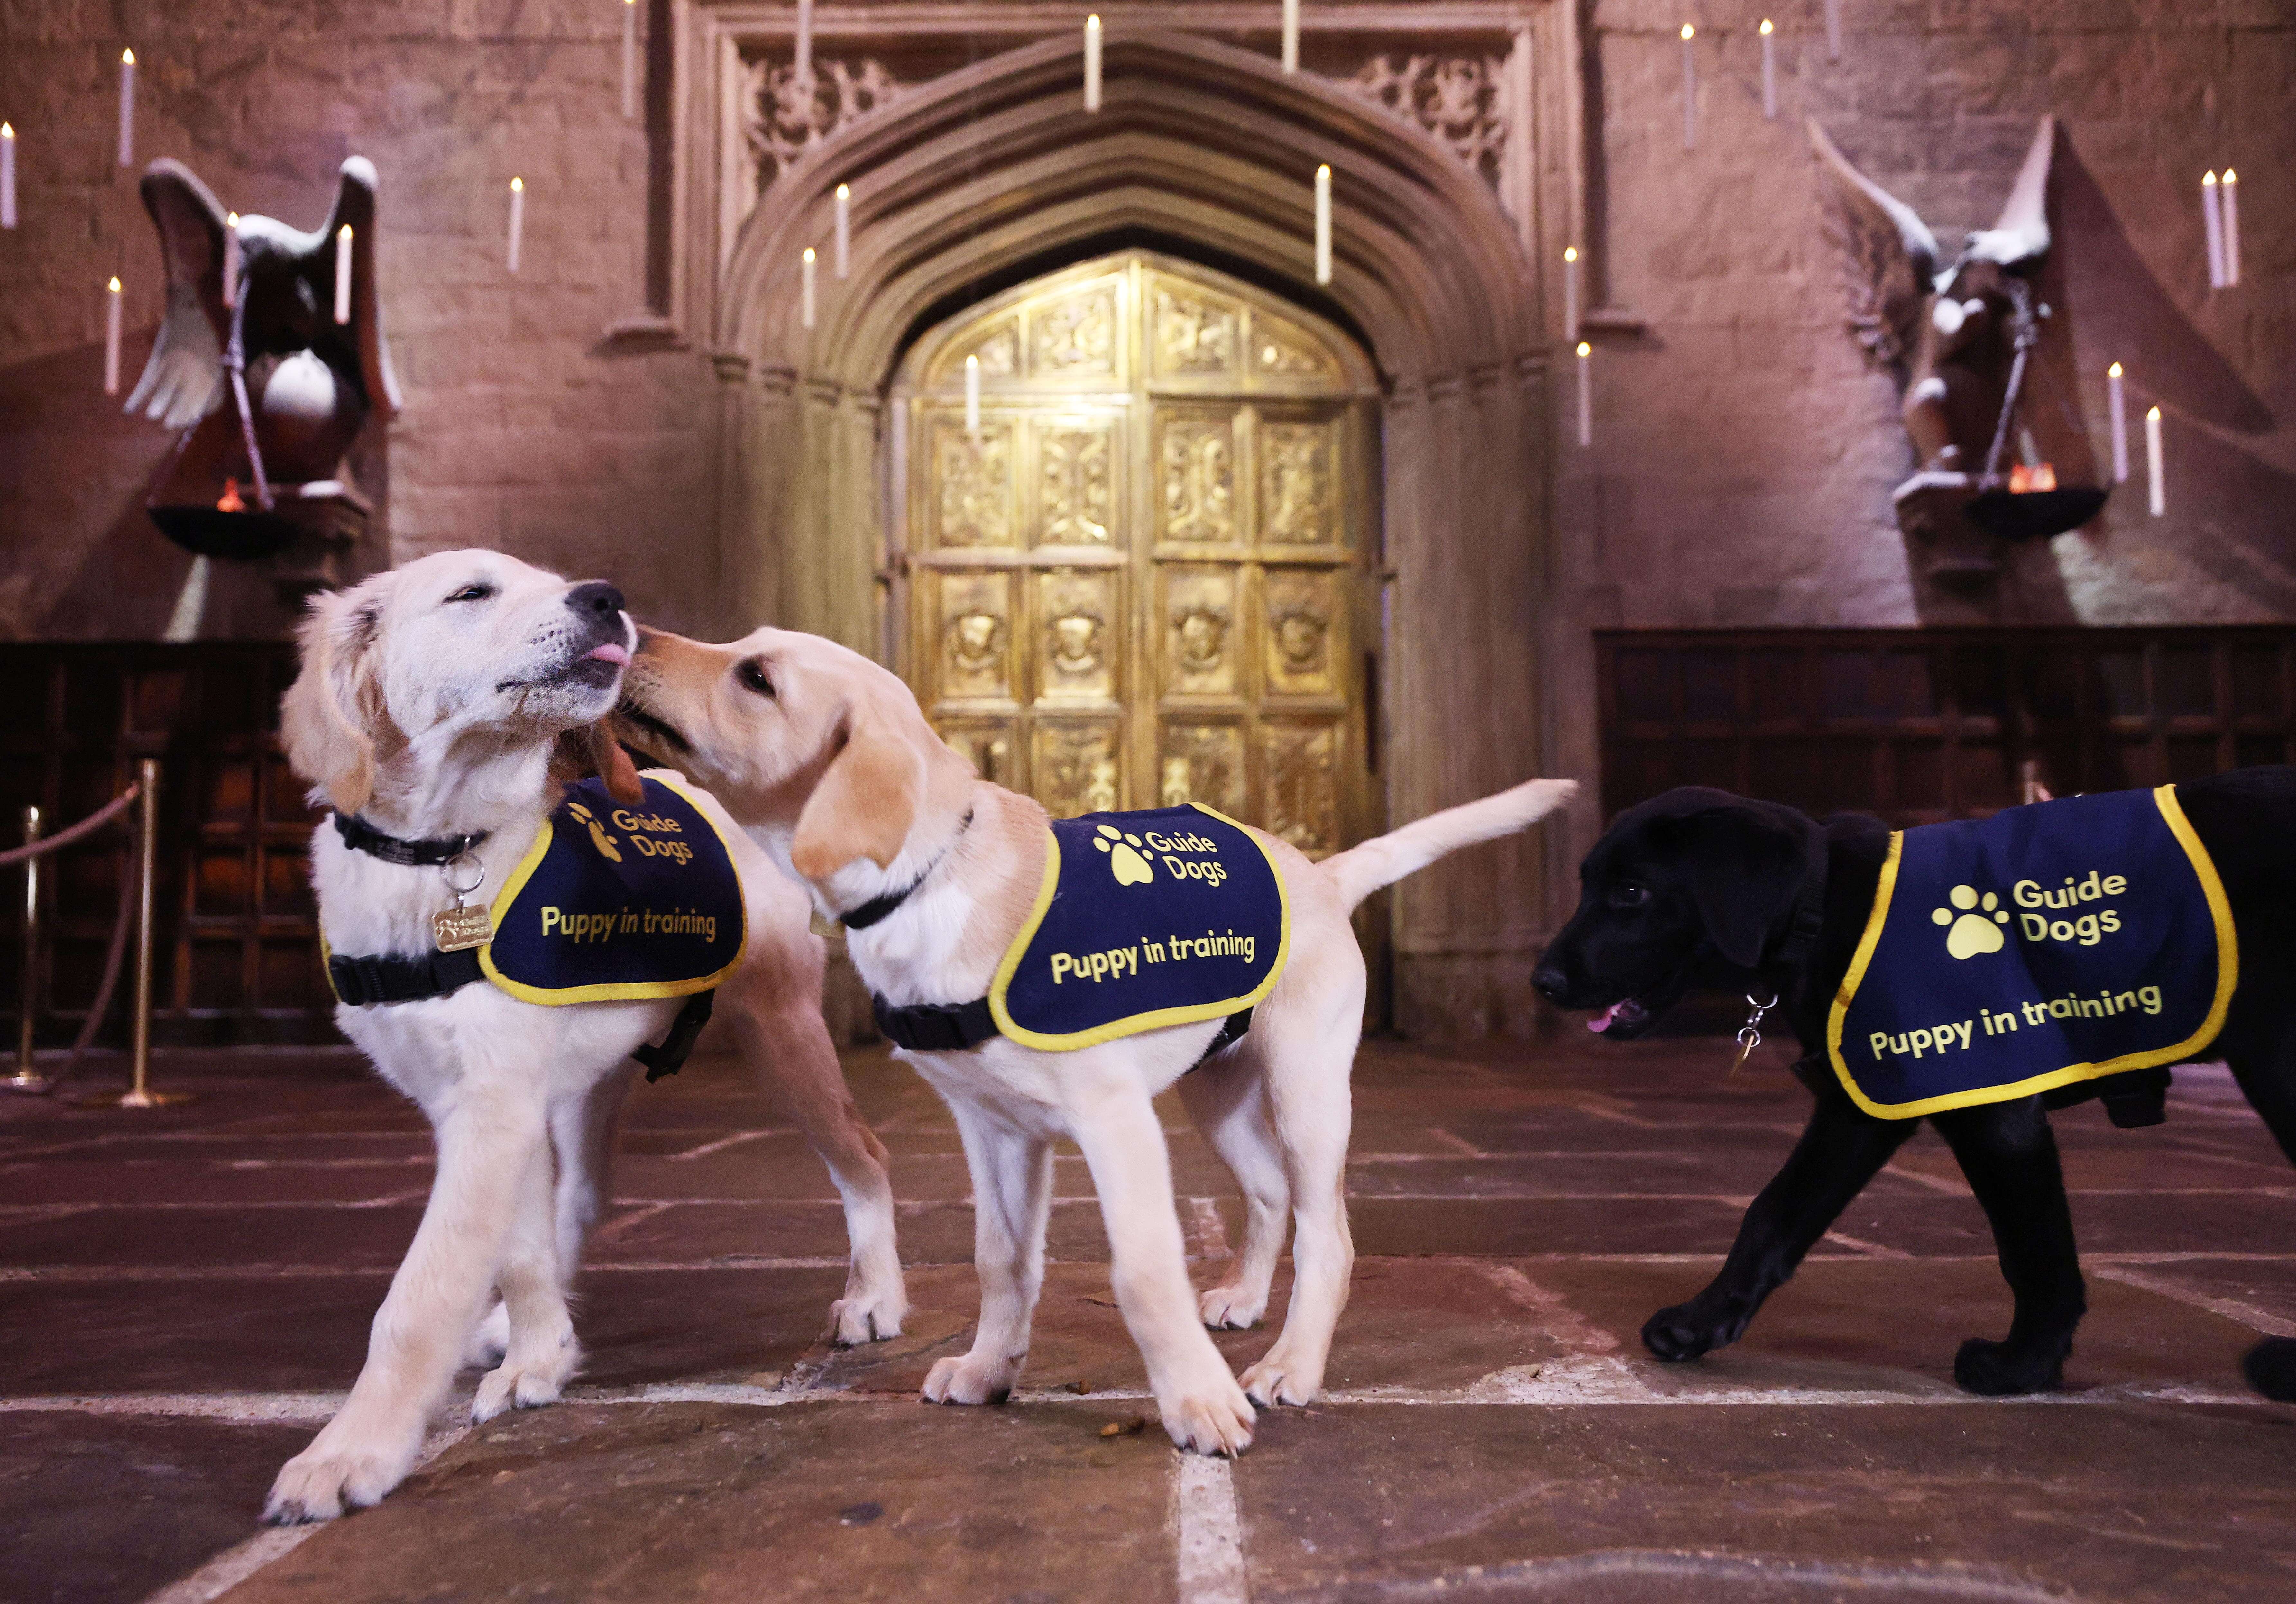 Guide dog puppies golden retriever Hermione and Labradors Ron and Harry play together in the Great Hall under floating candles